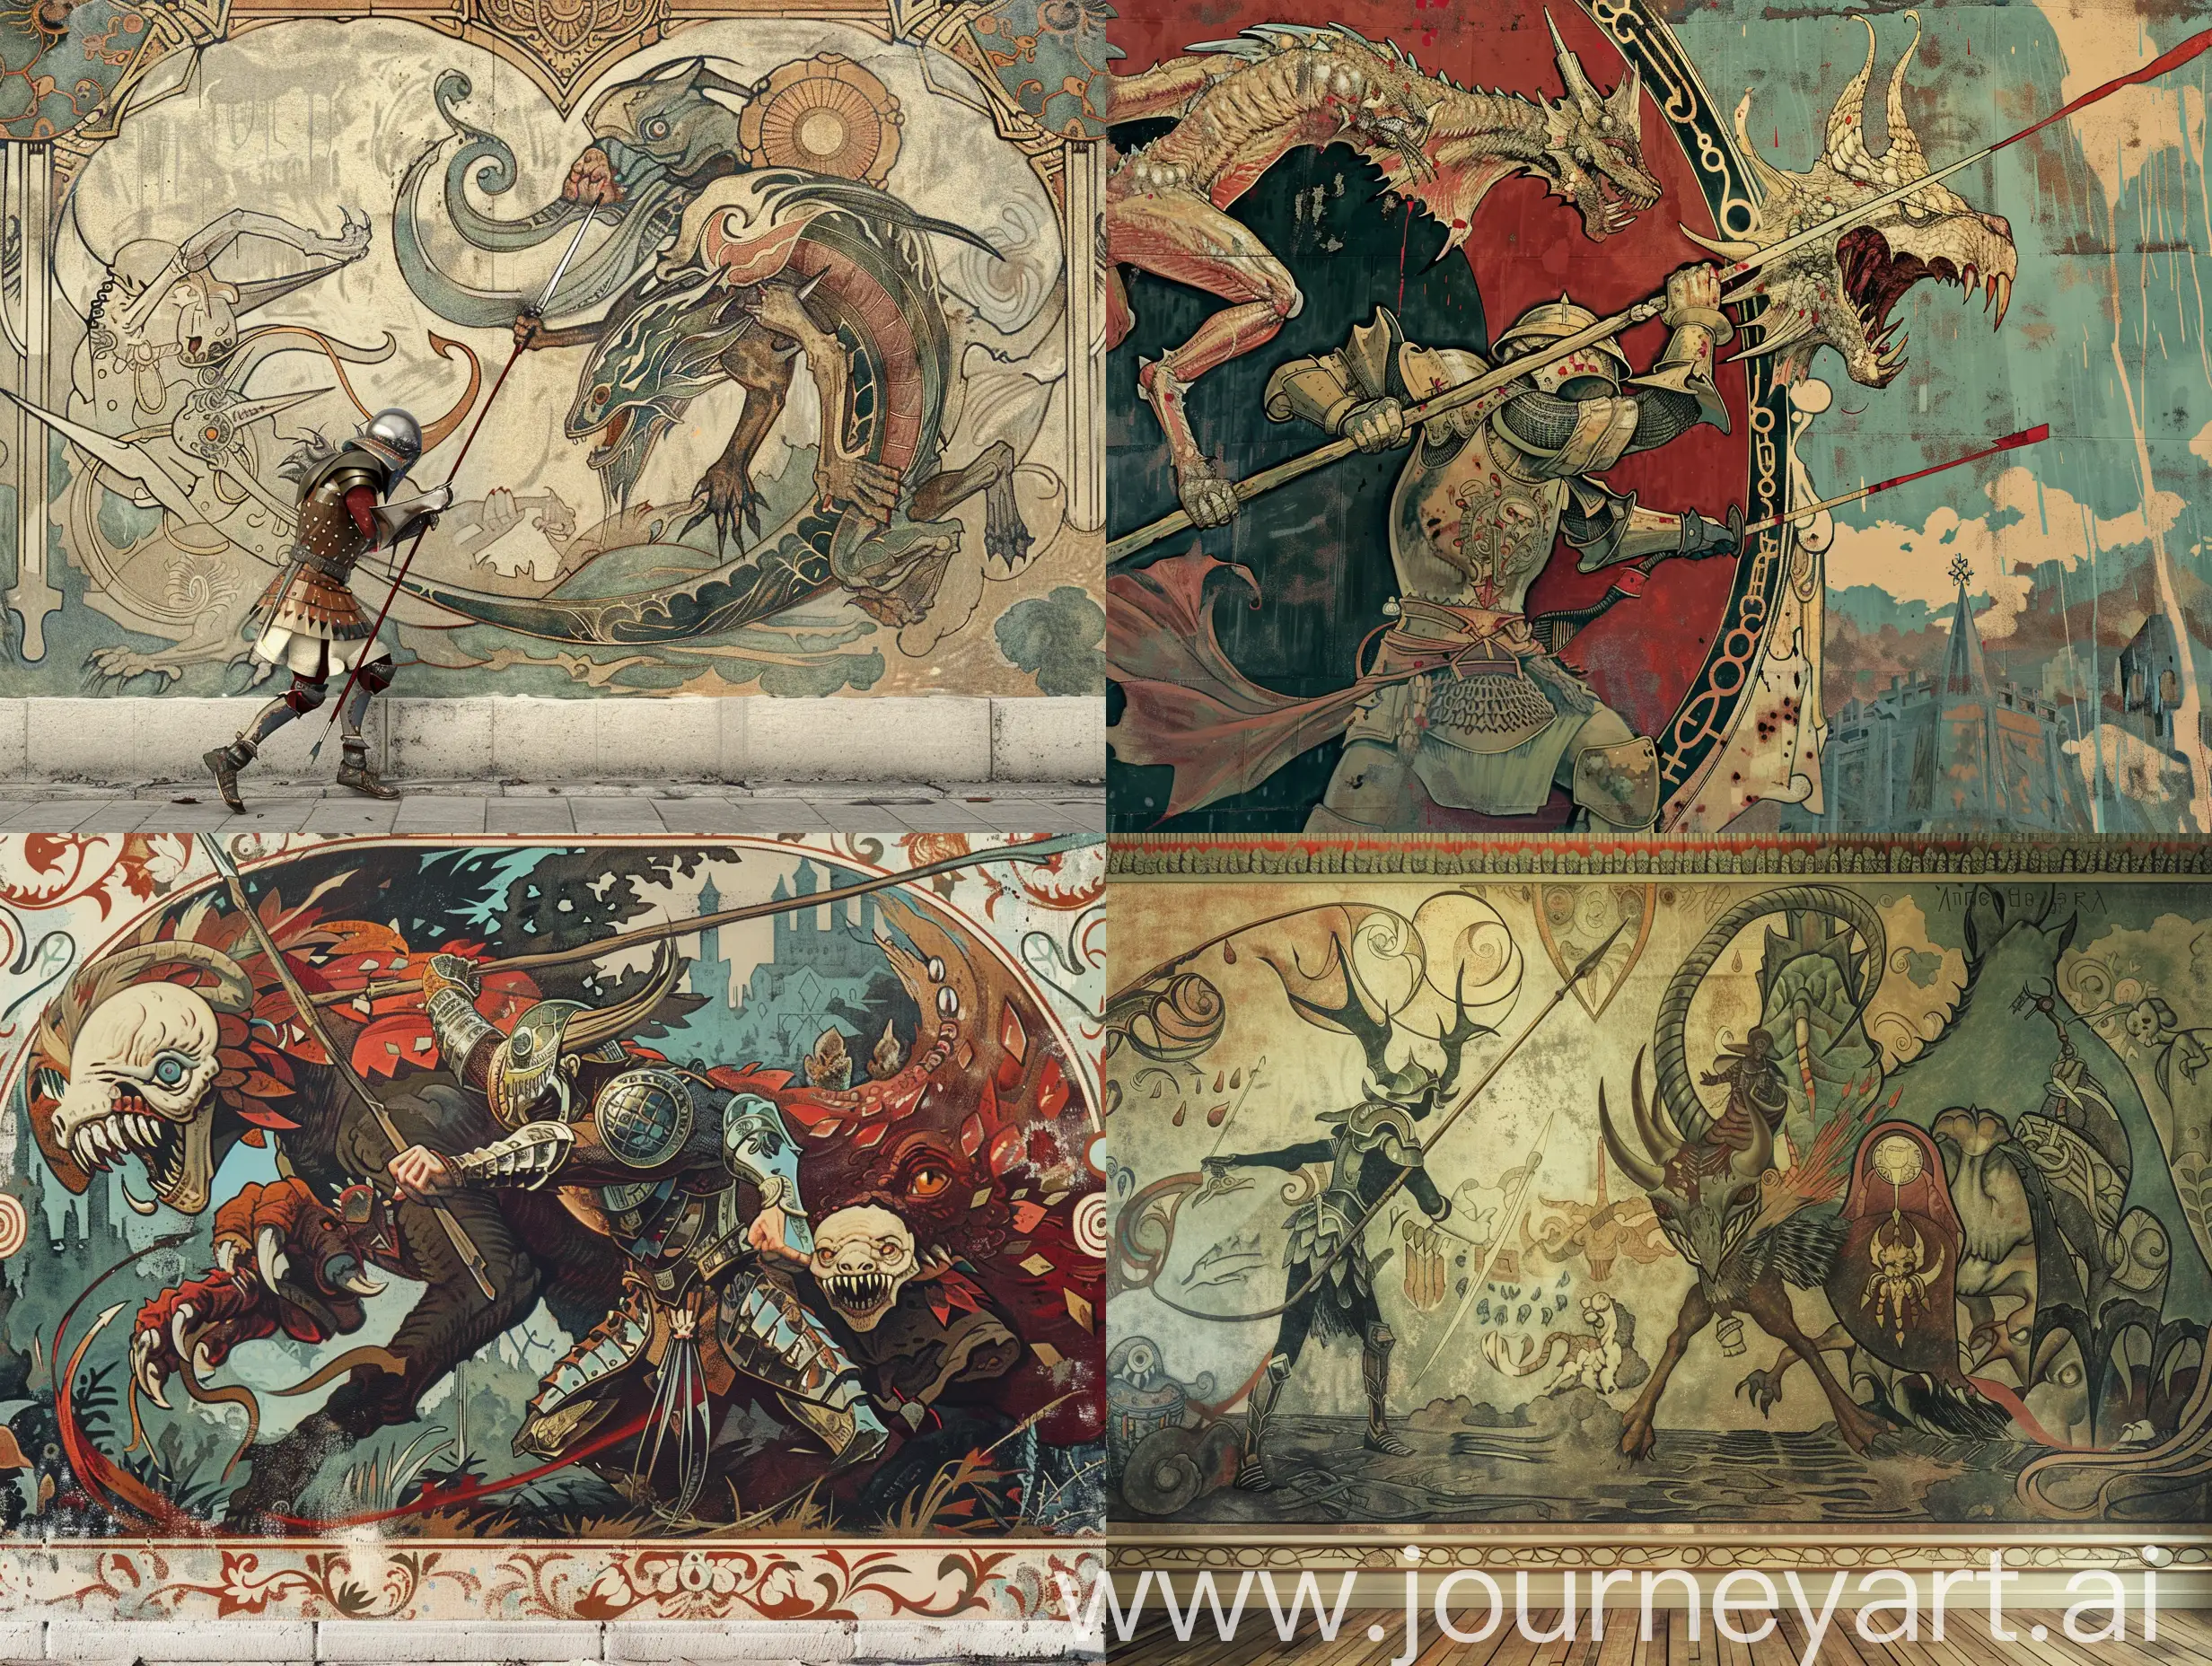 a mural on the wall depicting a battle scene of a warrior in armor with a spear against a two-headed scary monster. the mural on the wall. art nouveau style, Alphonse mucha style. fight, texture 8k.